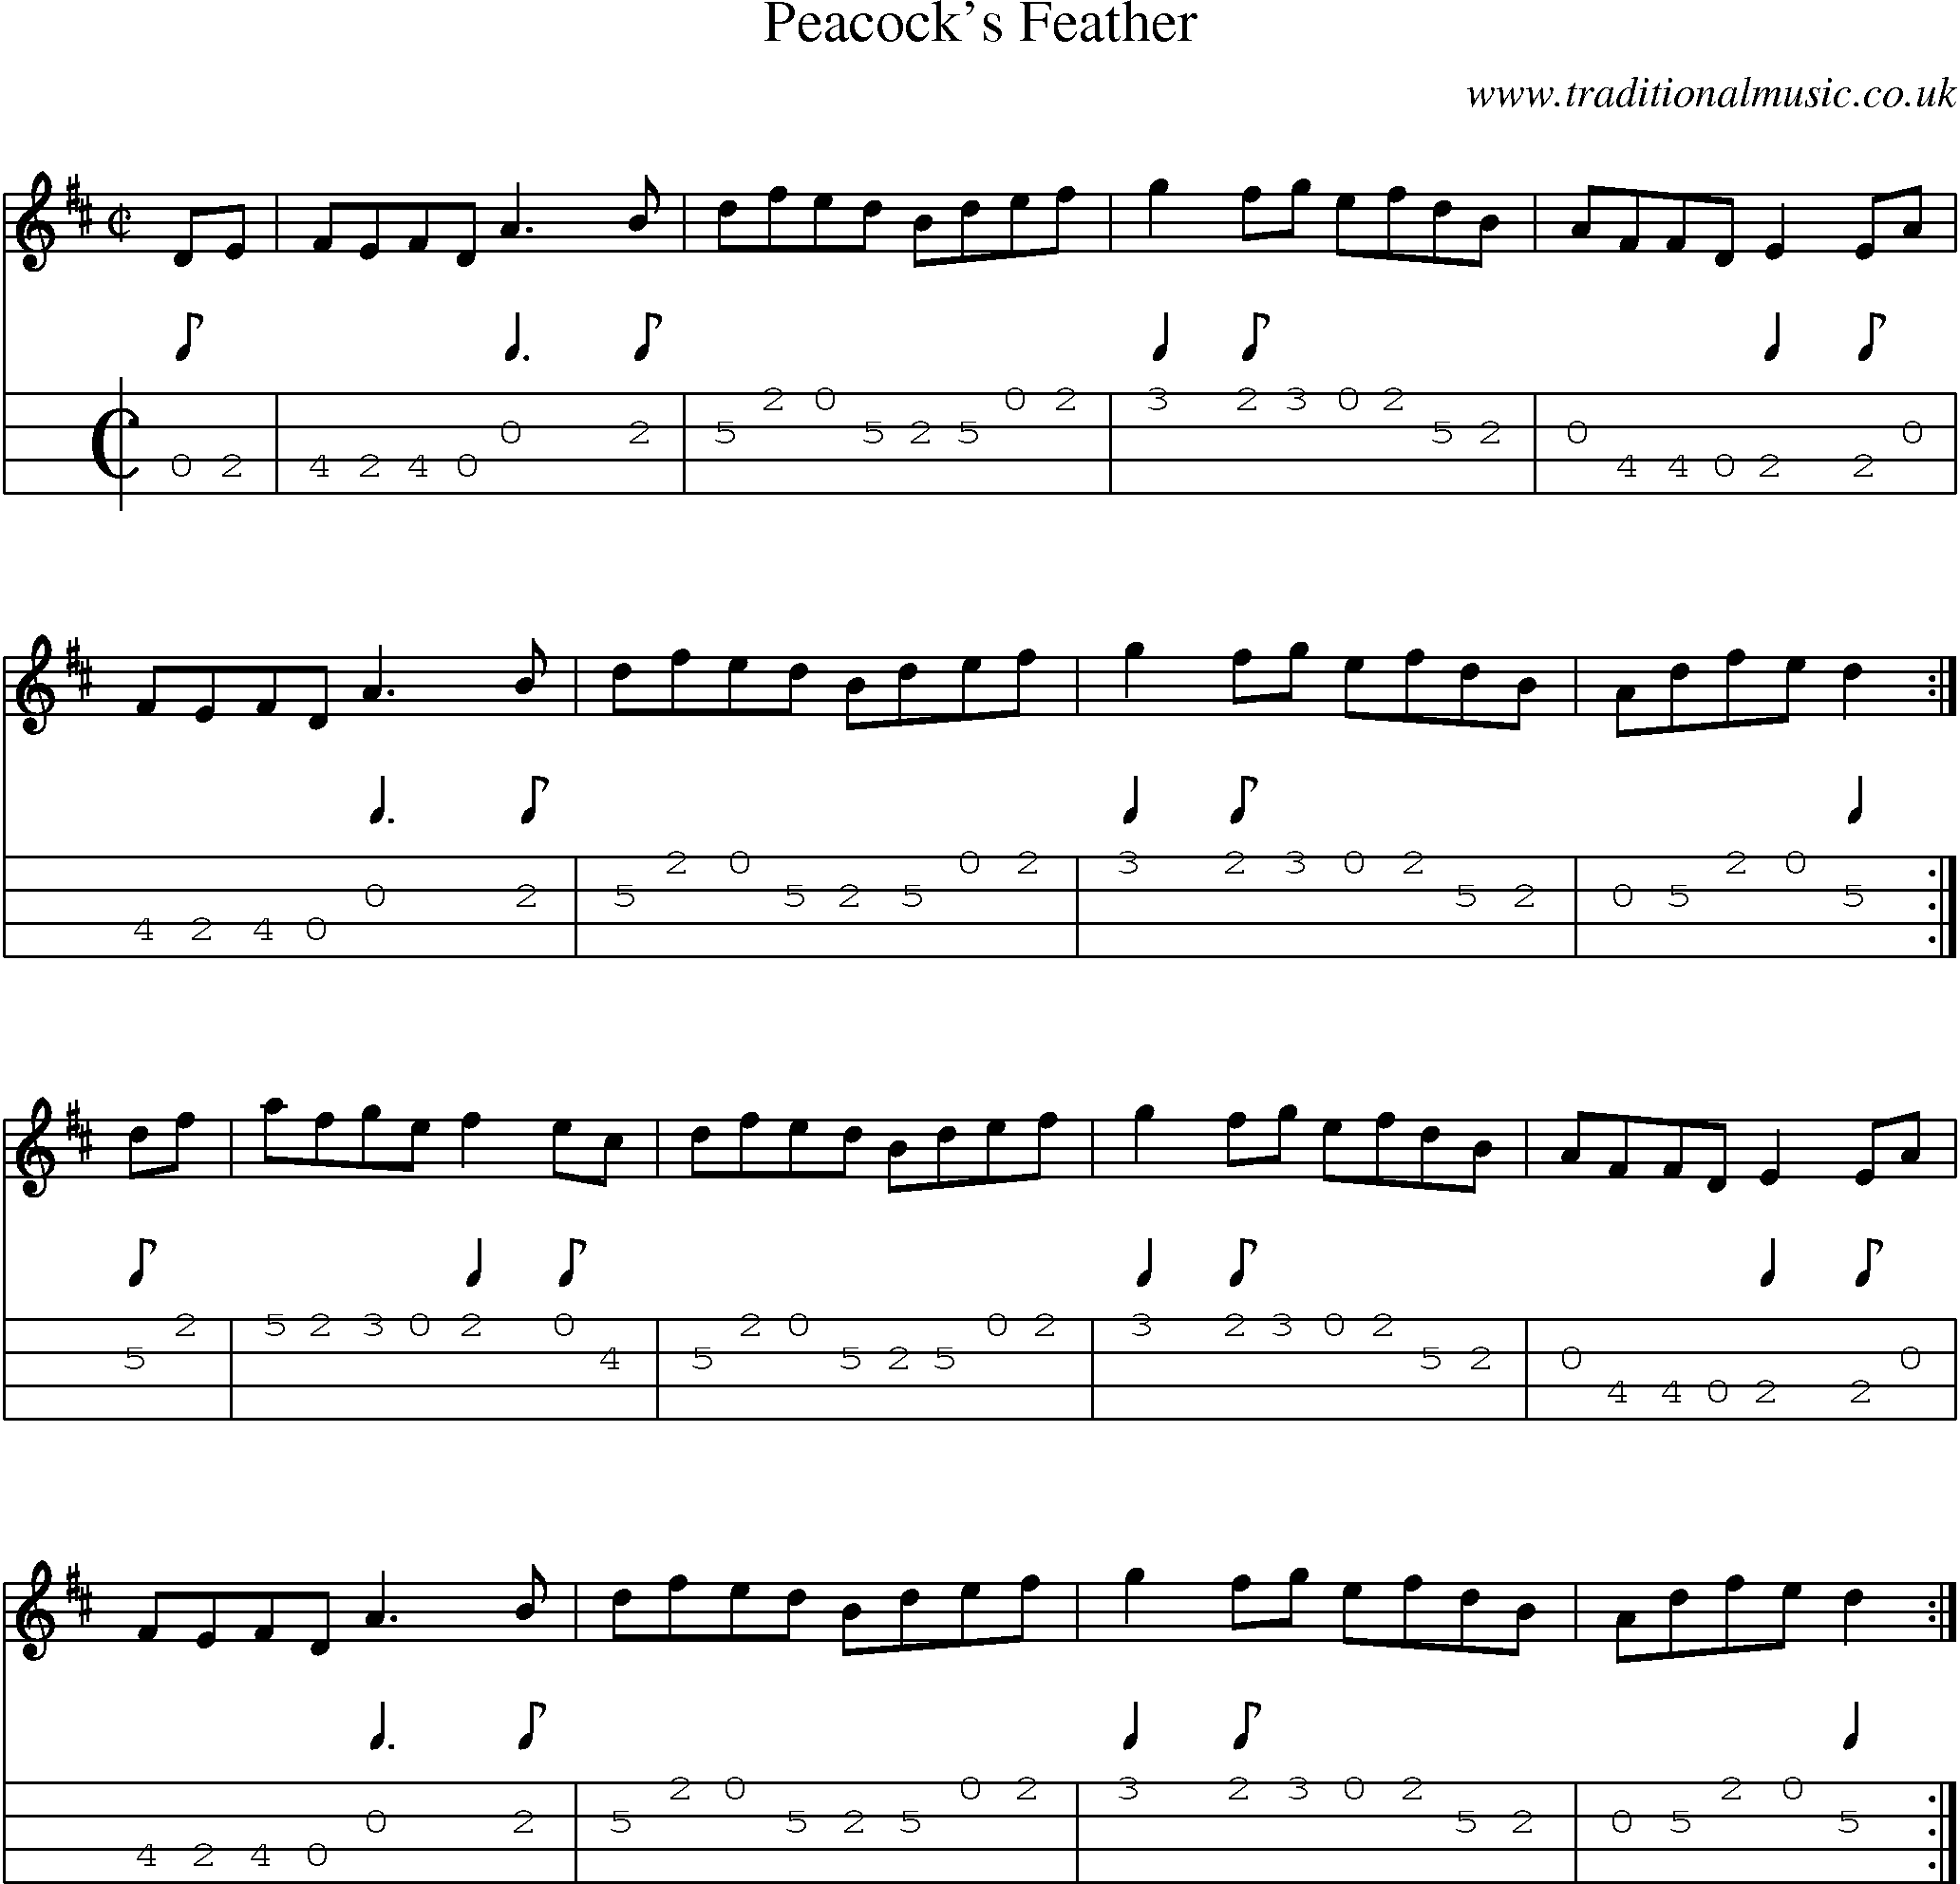 Music Score and Mandolin Tabs for Peacocks Feather